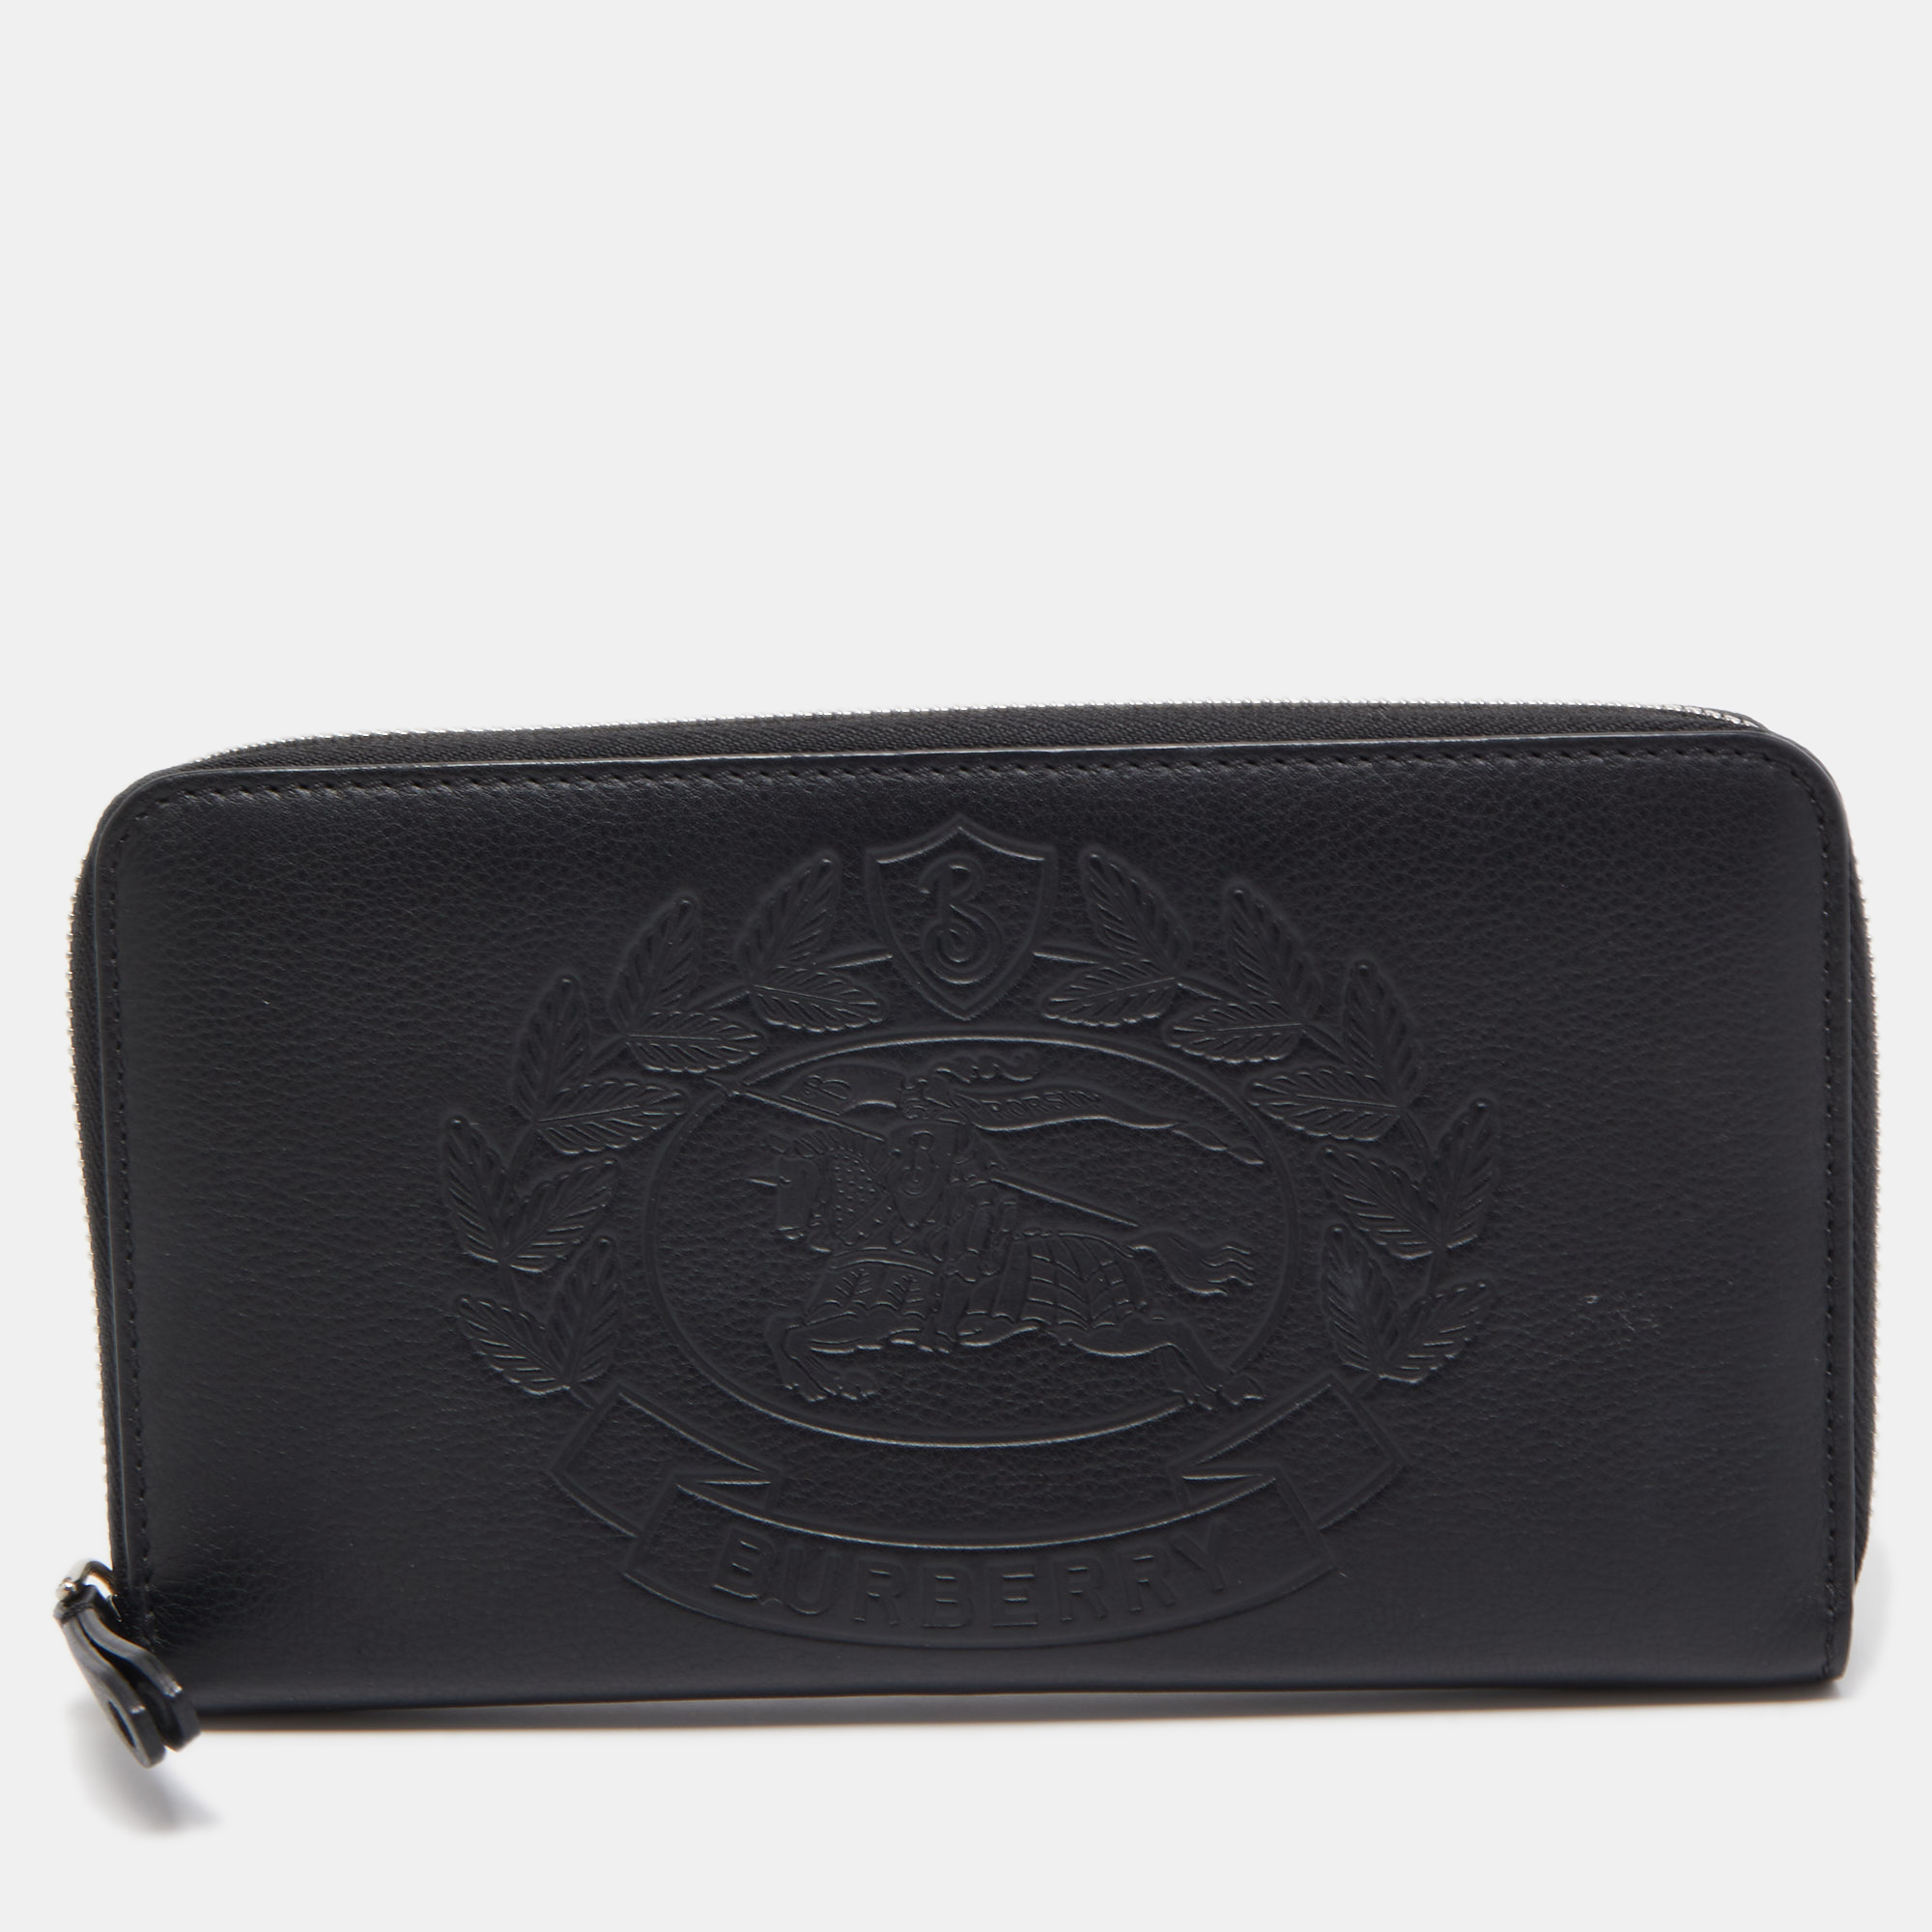 Pre-owned Burberry Black Leather Embossed Crest Zip Around Wallet